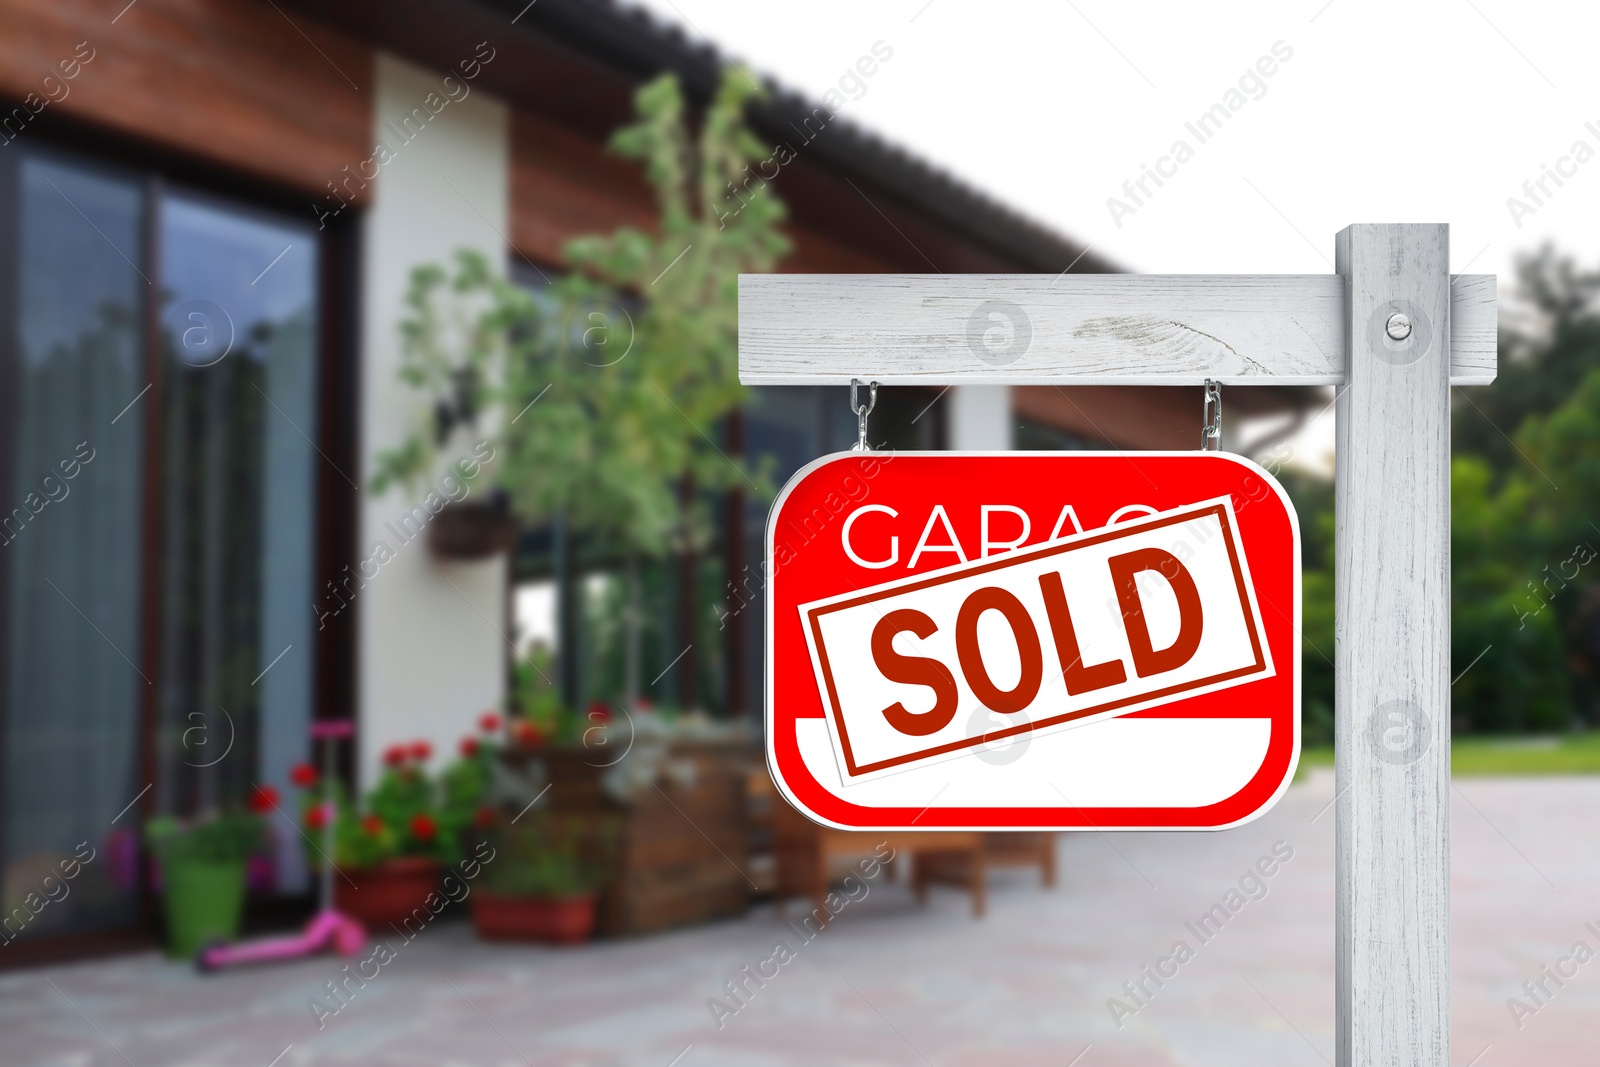 Image of Garage sale sign with Sold sticker near house